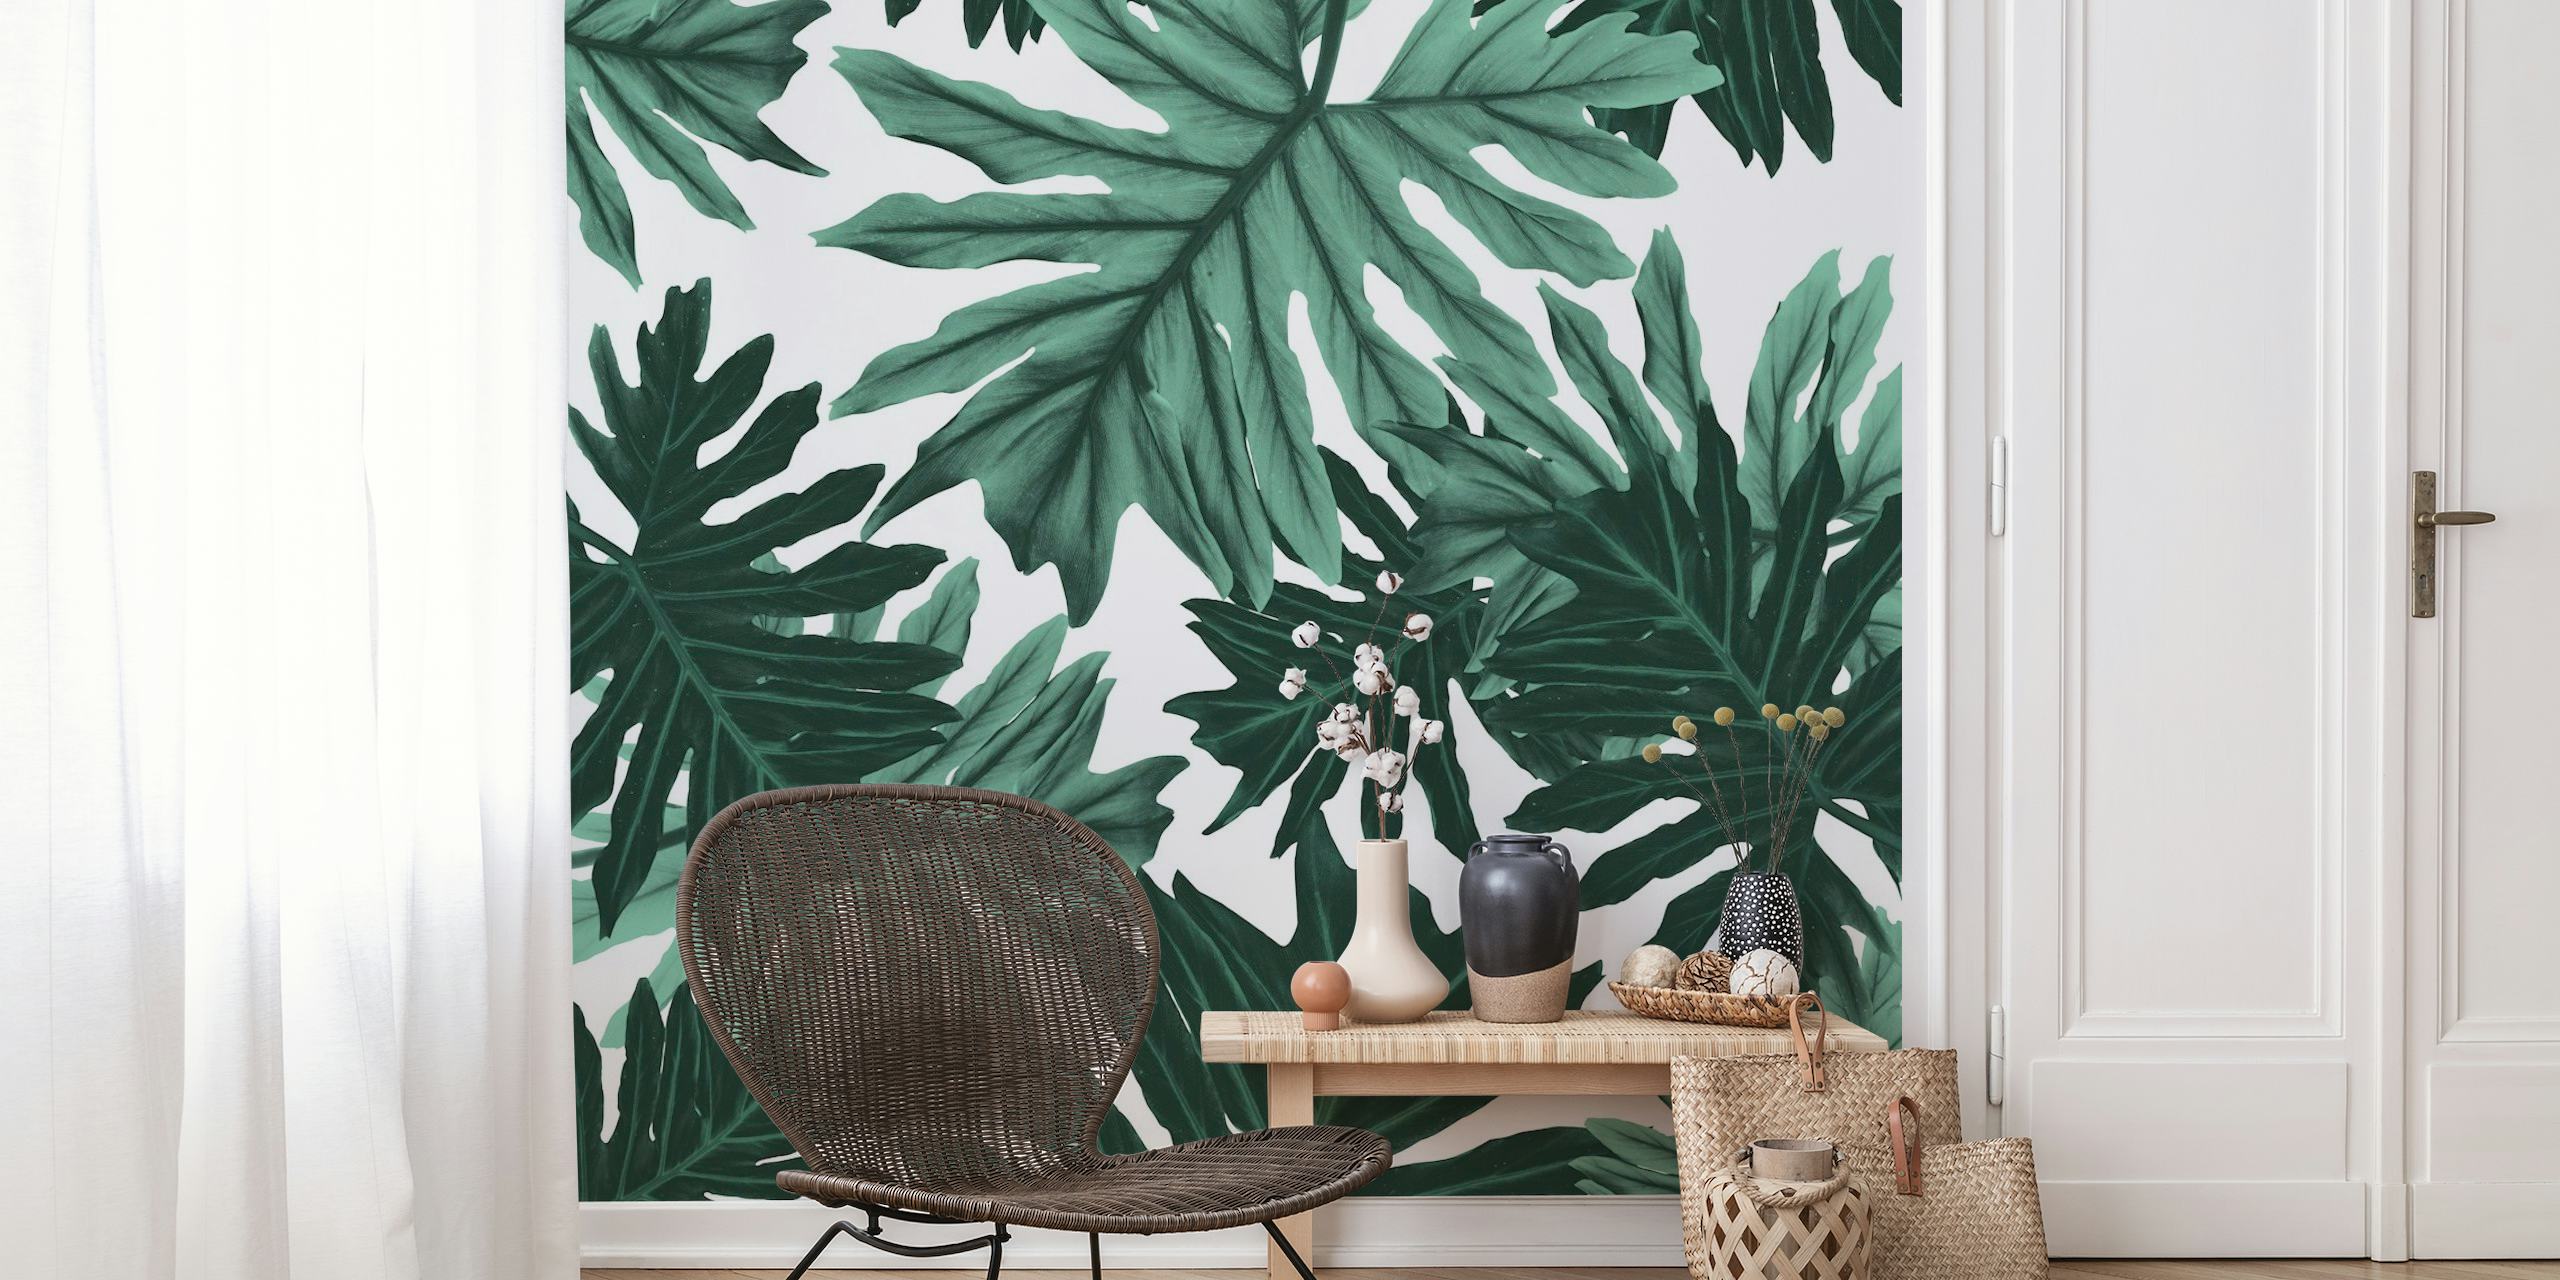 Wall mural featuring tropical jungle leaves in shades of green, Philo Hope Tropical Jungle 6 design for a nature-inspired decor.